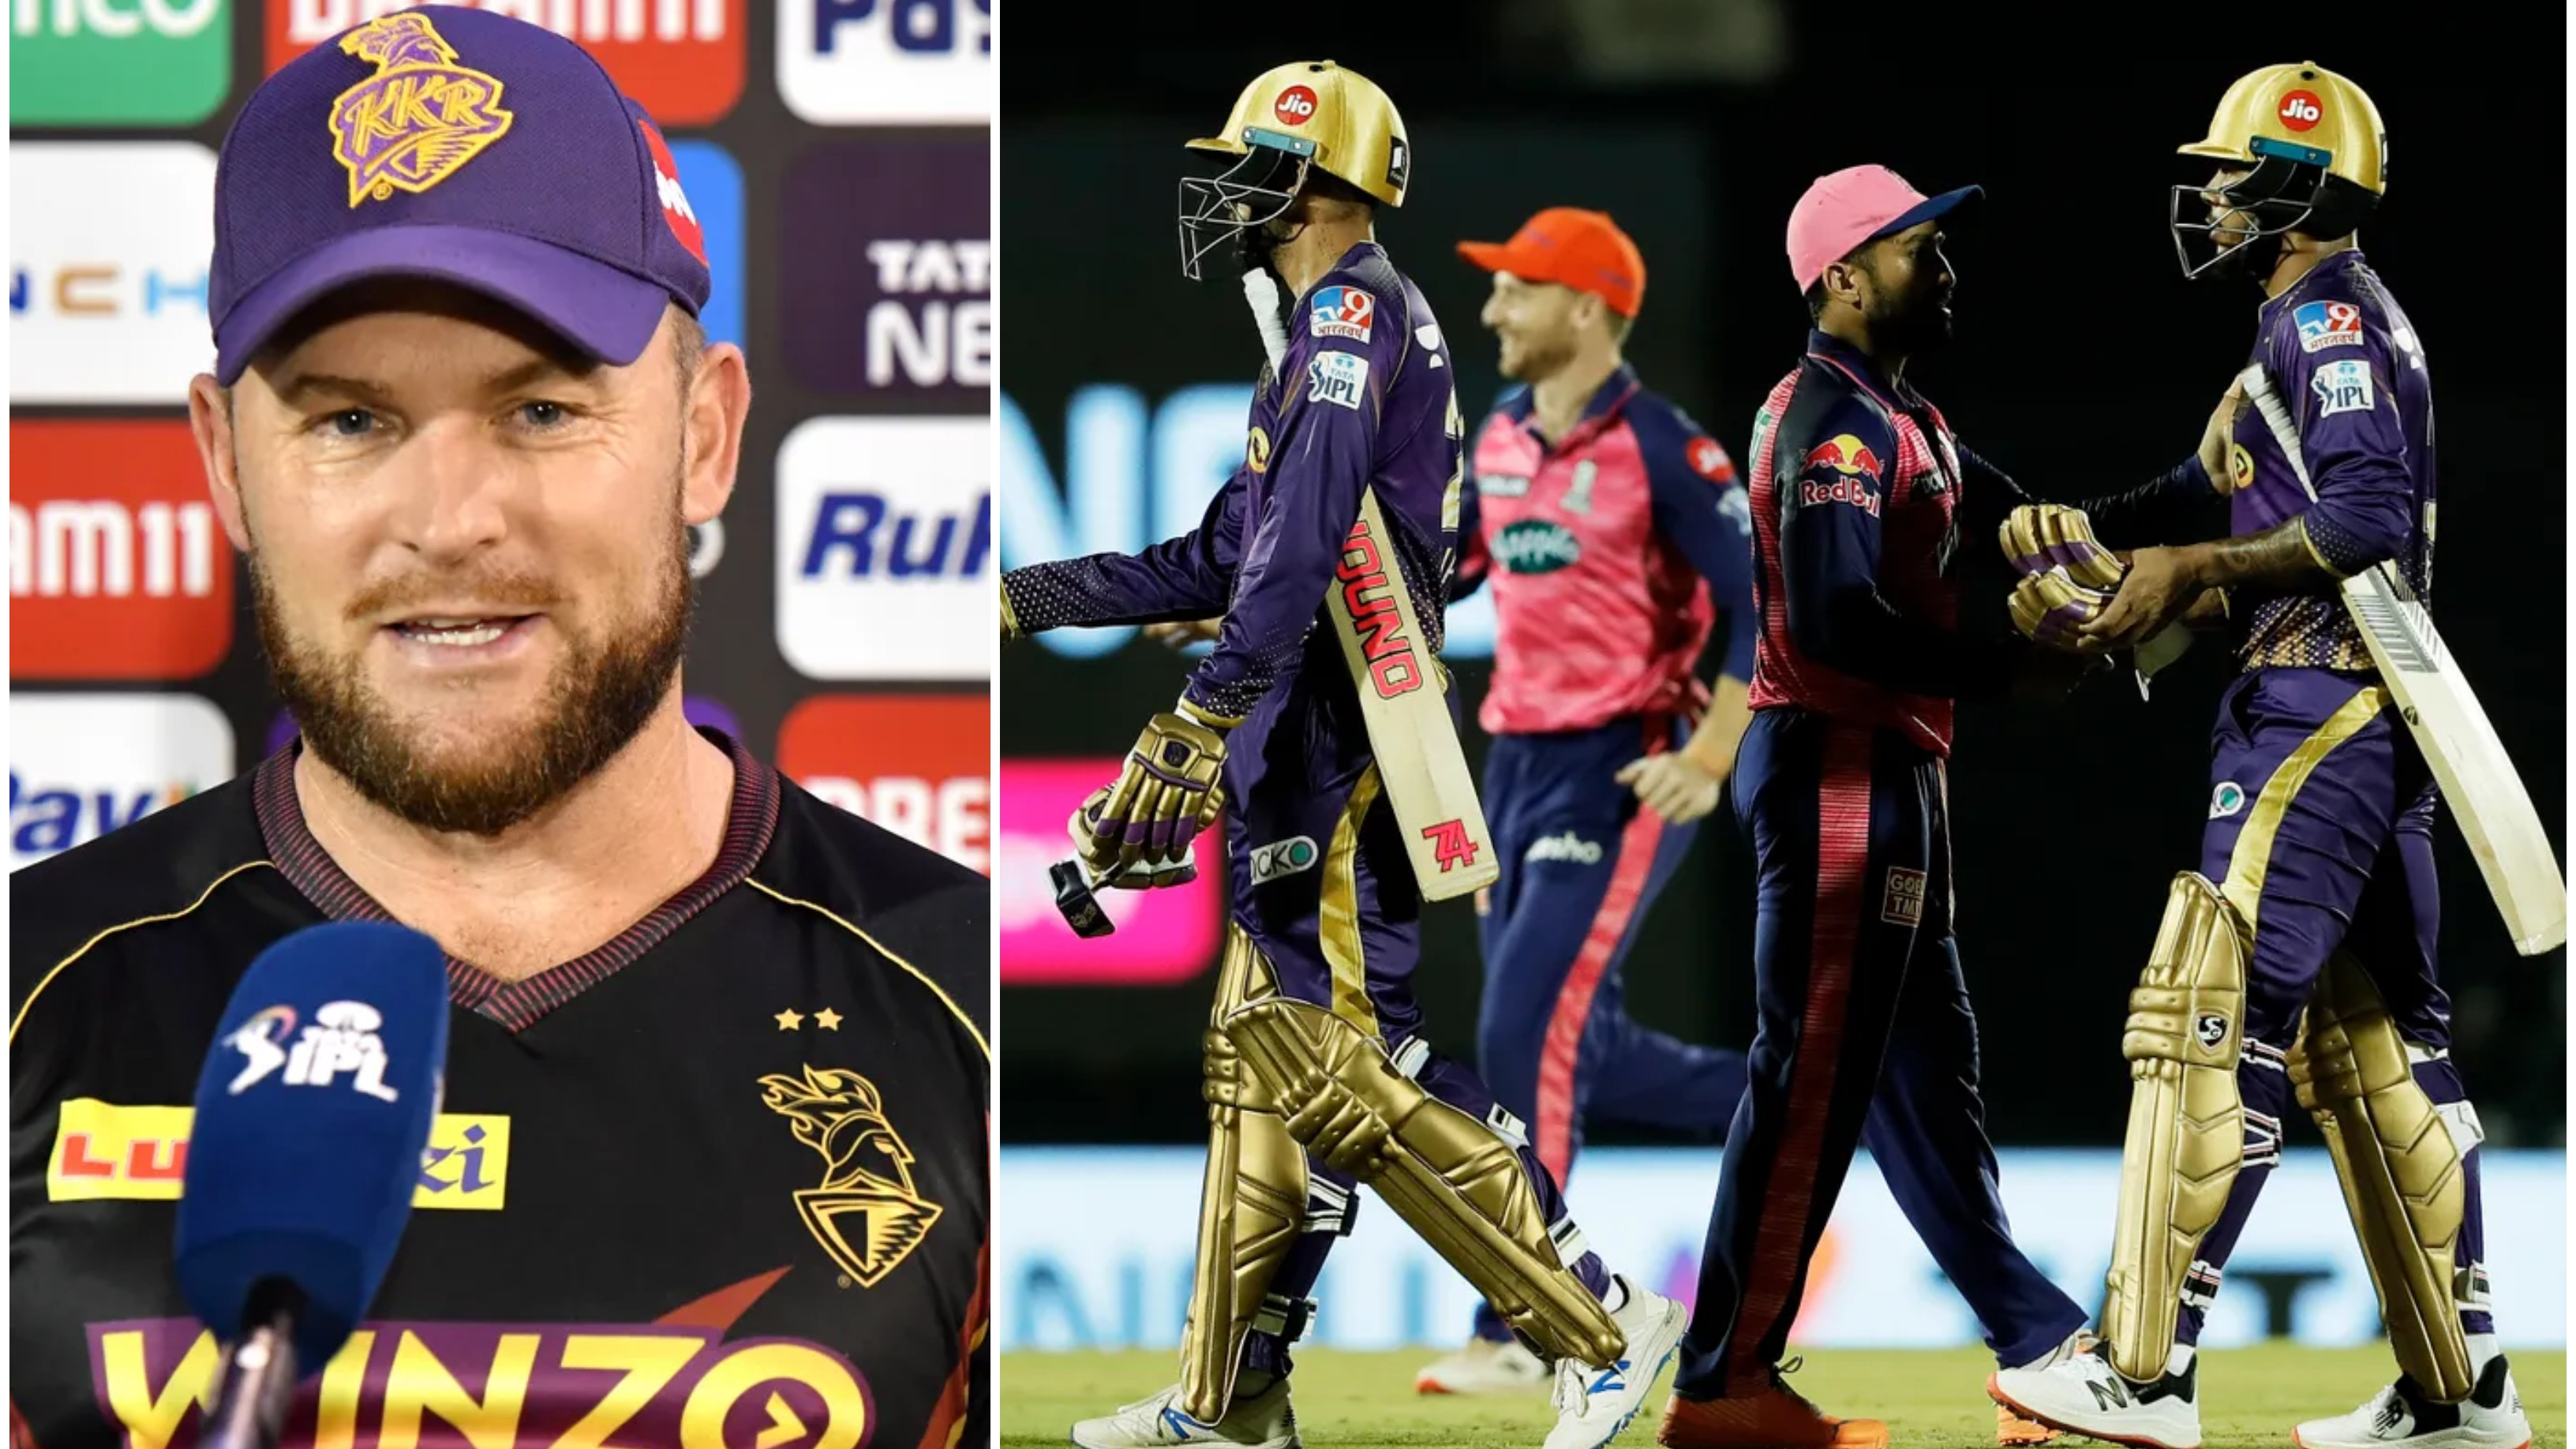 IPL 2022: Brendon McCullum rues ‘some silly mistakes’ in pressure situation after KKR’s narrow loss to RR